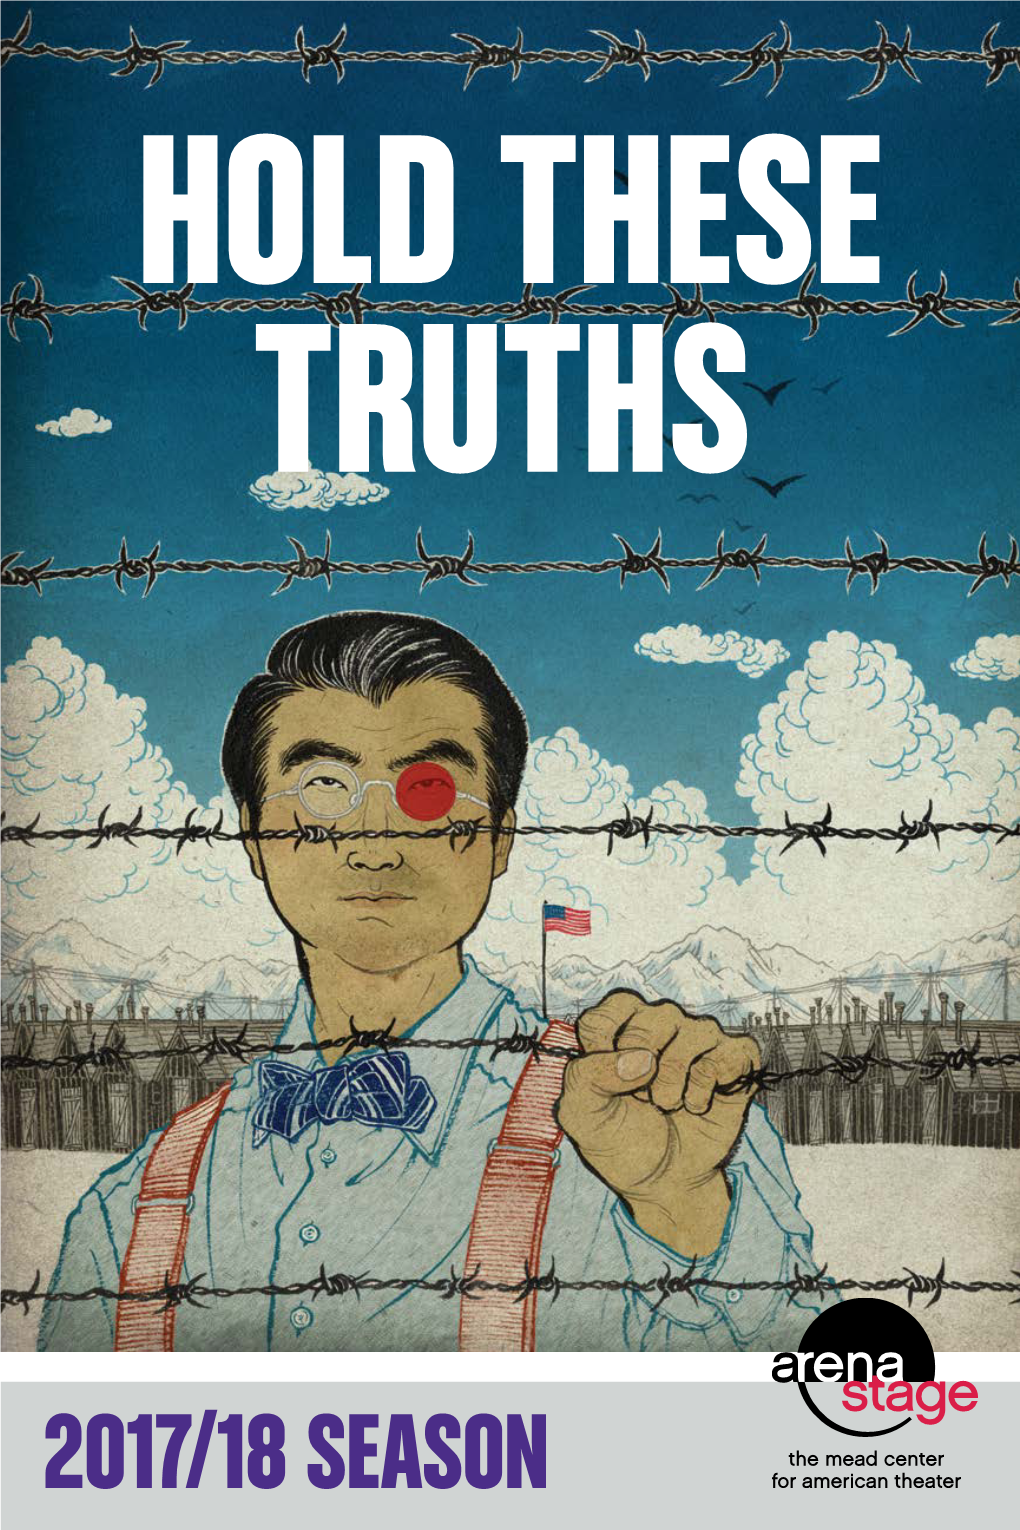 Hold These Truths Program Book Published February 23, 2018